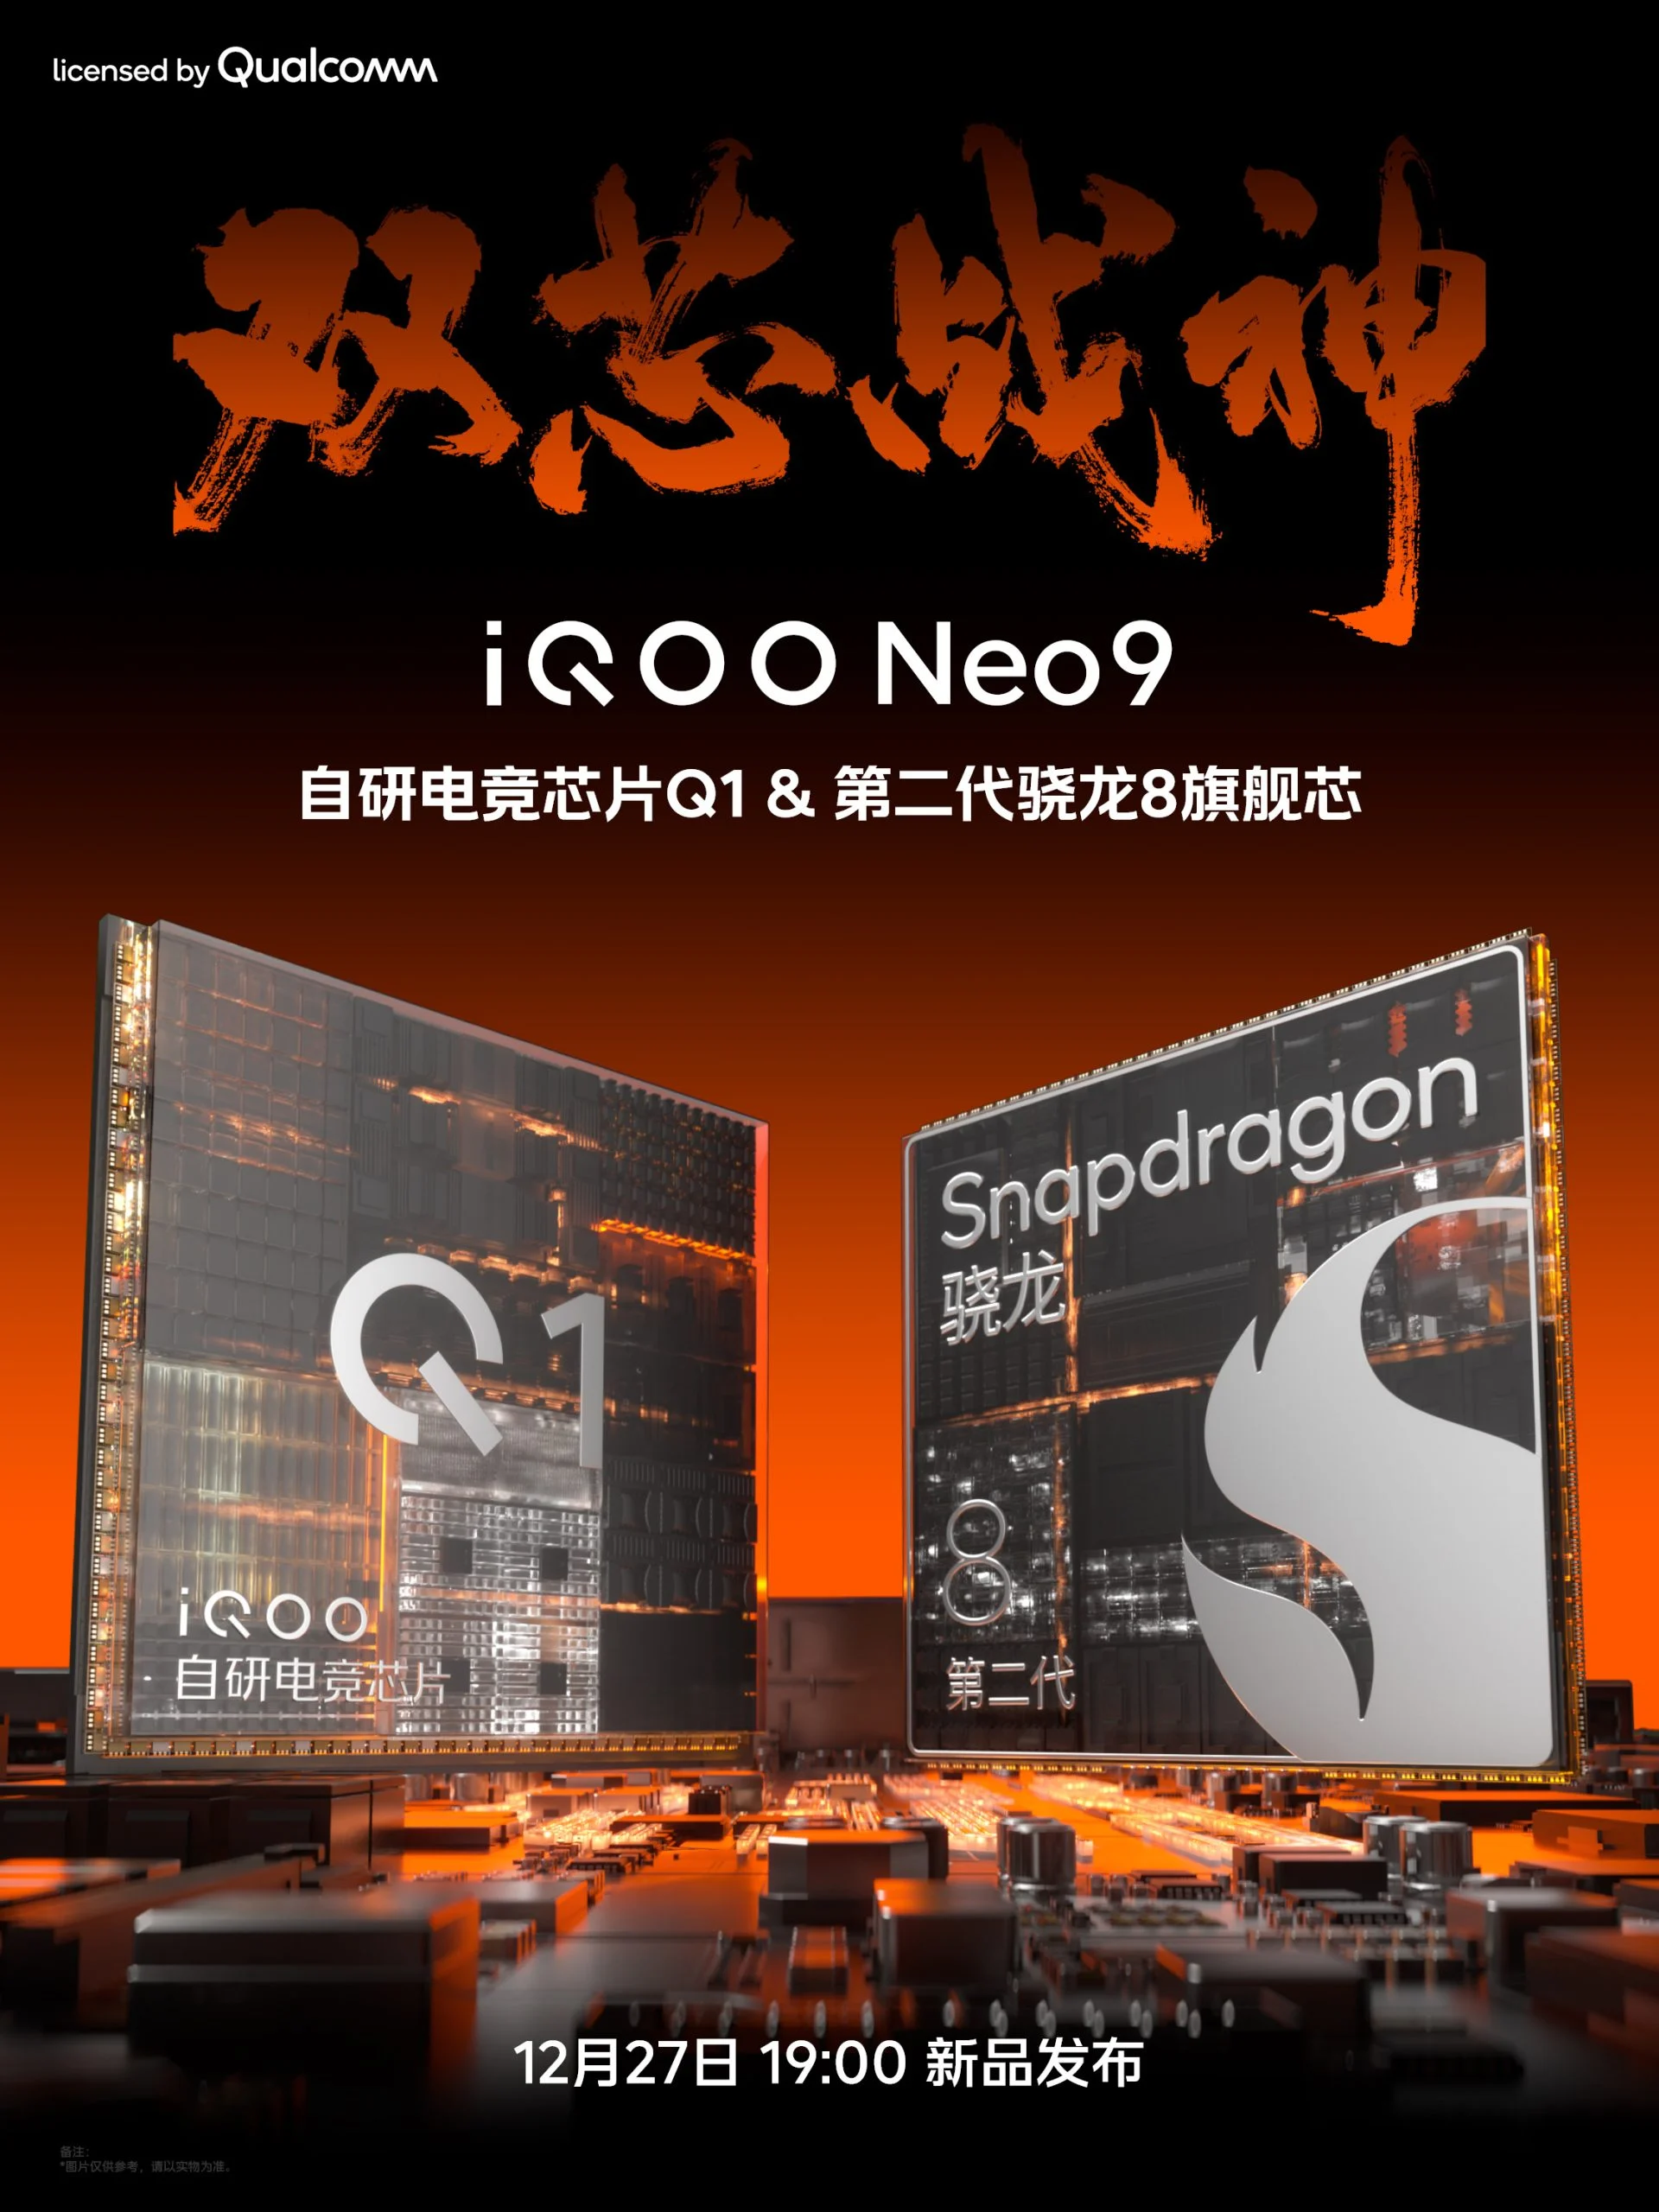 When will iQOO Neo 9 be introduced and which processor will it be powered by?